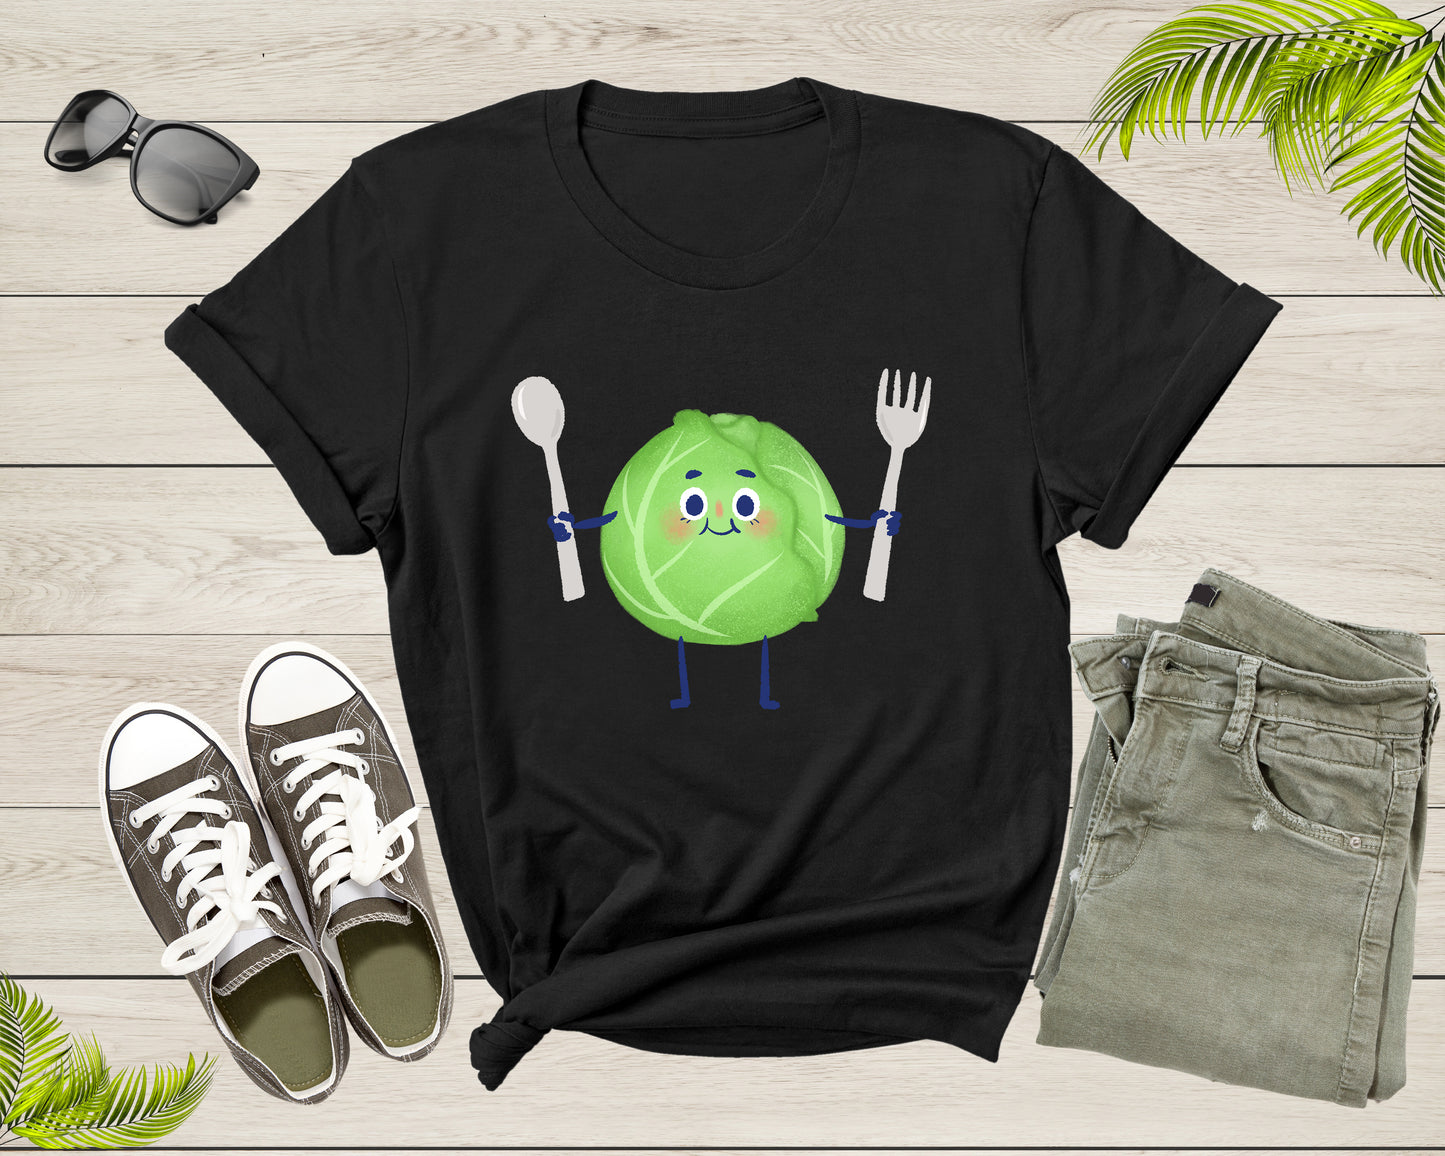 Cute Green Cabbage Vegetable Holding Fork and Spoon Standing T-Shirt Cabbage Lover Gift T Shirt for Men Women Kids Boys Girls Graphic Tshirt